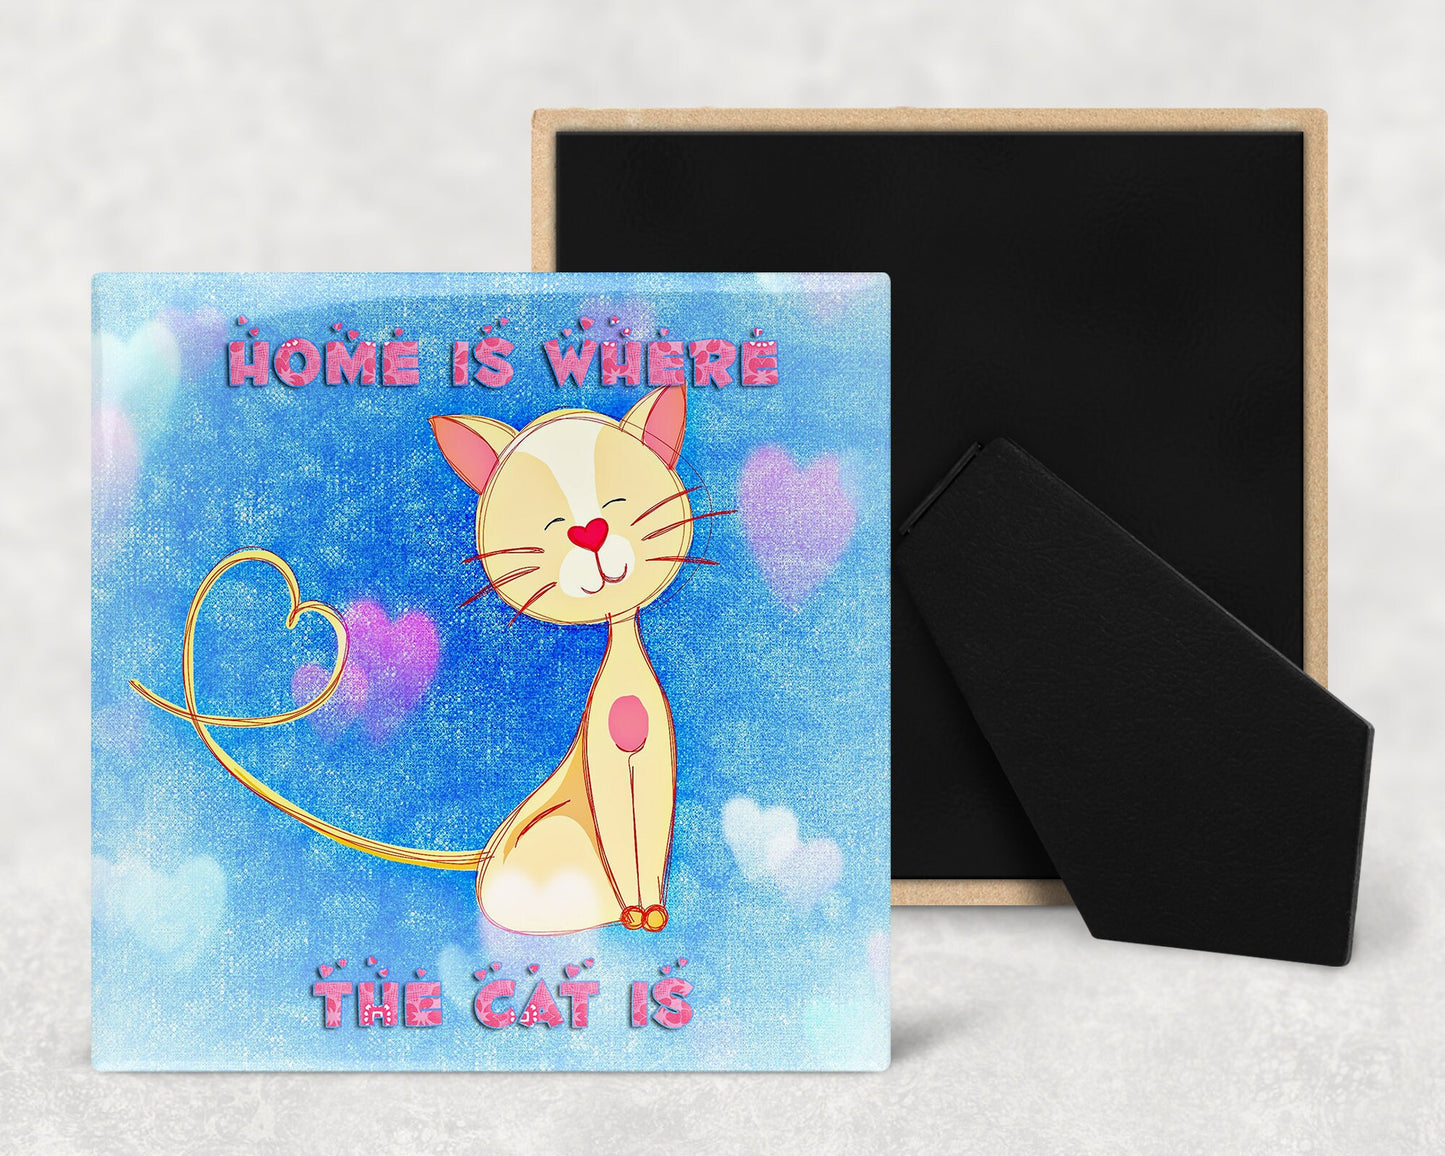 Home is Where the Cat is Art Decorative Ceramic Tile with Optional Easel Back - Available in 3 Sizes